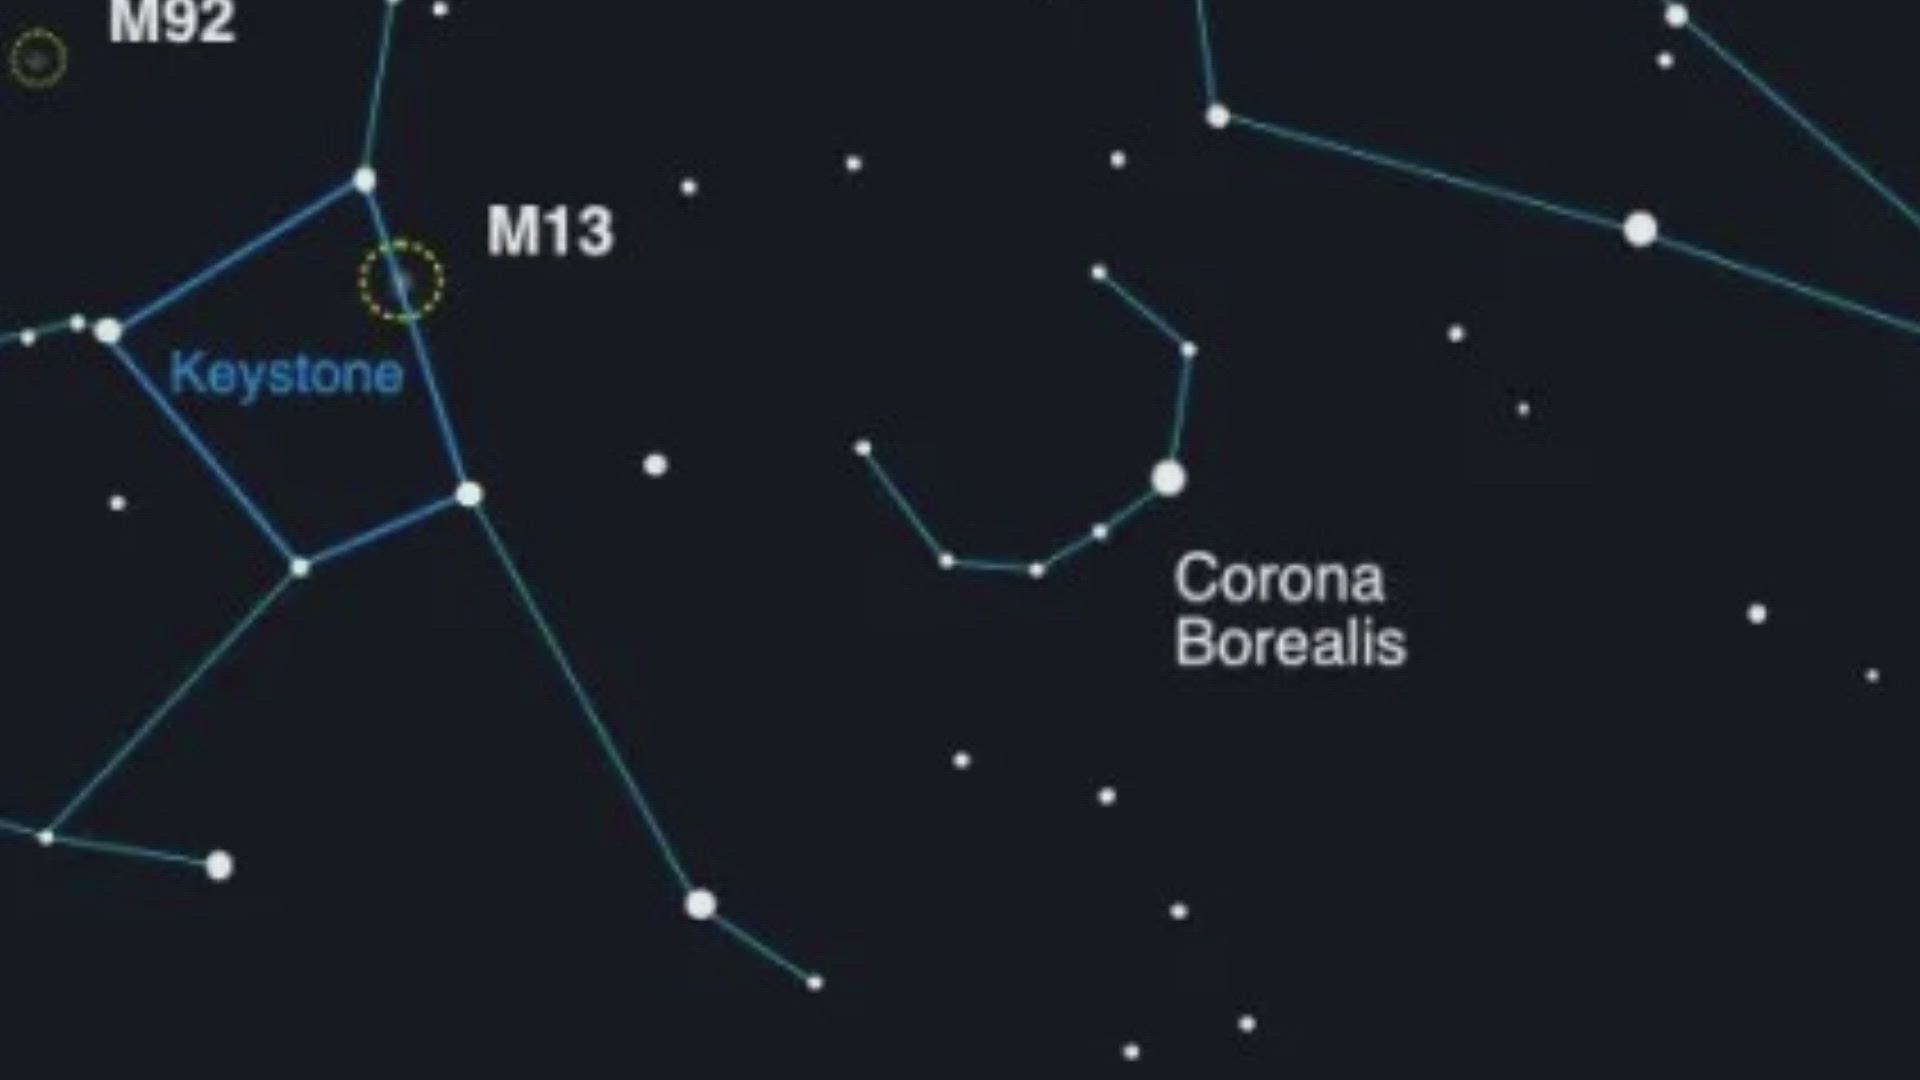 A star system called T Coronae Borealis explodes about once every 80 years, and astronomers believe the next explosion will happen this spring or summer.